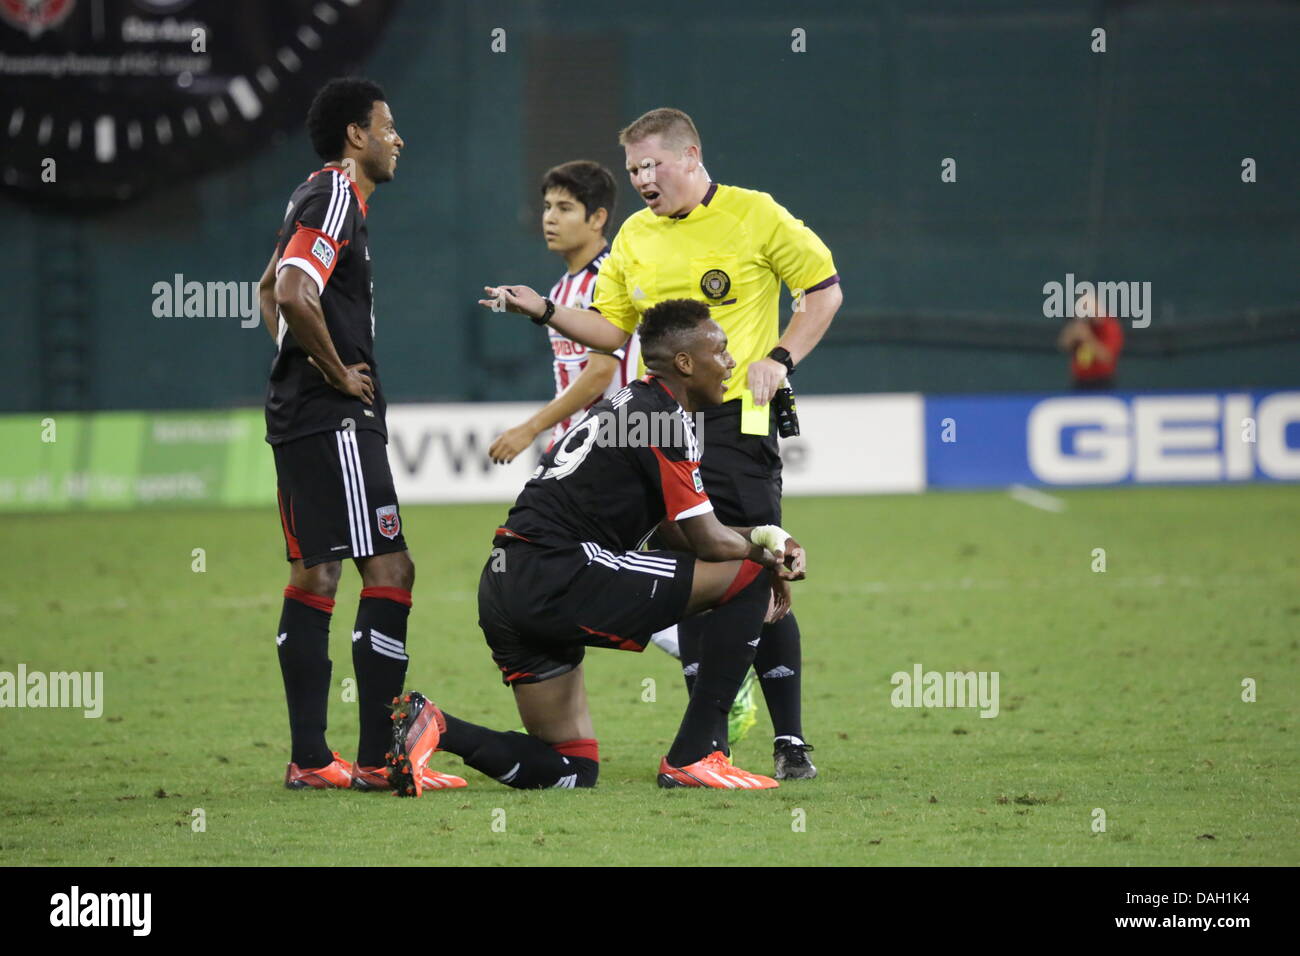 Washington DC, USA. 12th July 2013. Washington DC RFK Stadium Friendly Soccer Match between the D.C. United and the Guadalajara Chivas. Michael Seaton (29) is given a talking to from the ref on the hard tackle. Seaton is given a yellow card. Stock Photo